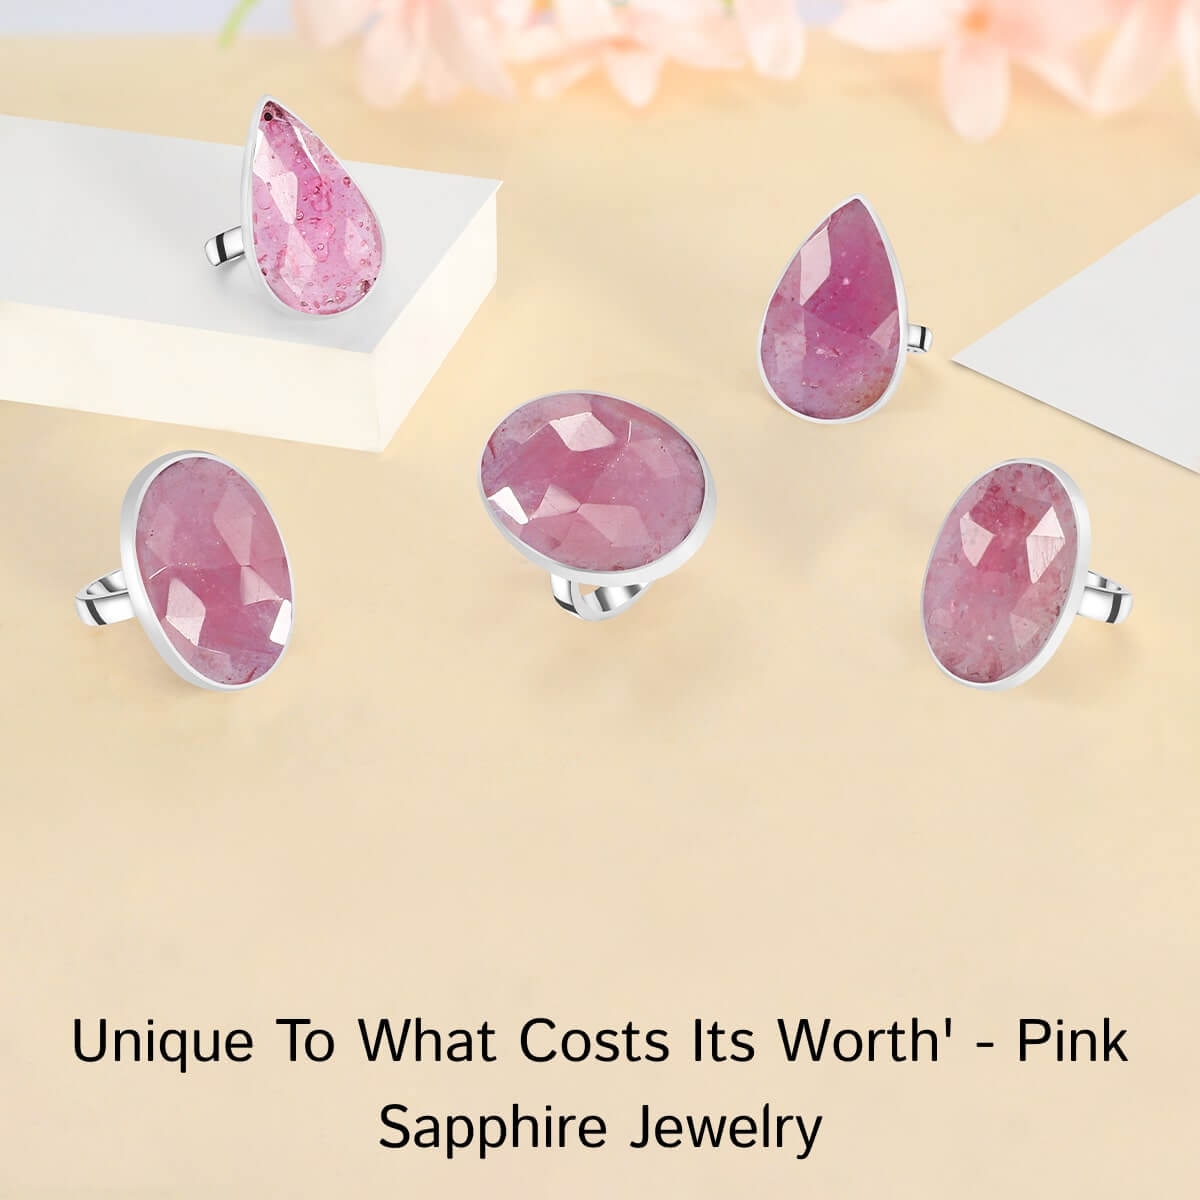 Value and Rarity of Pink Sapphire stone